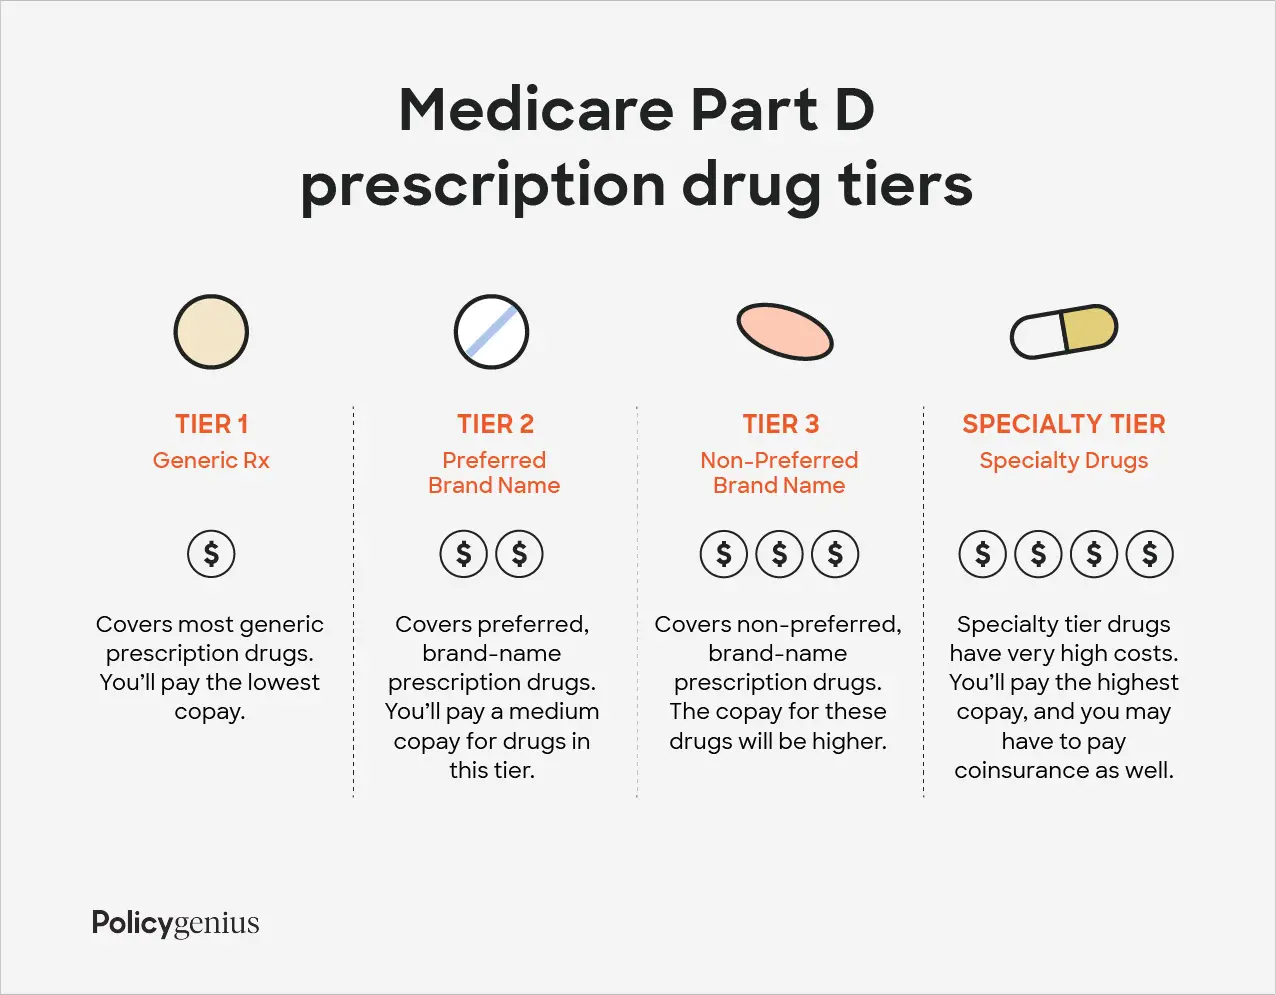 Your Guide to Medicare Part D for 2021